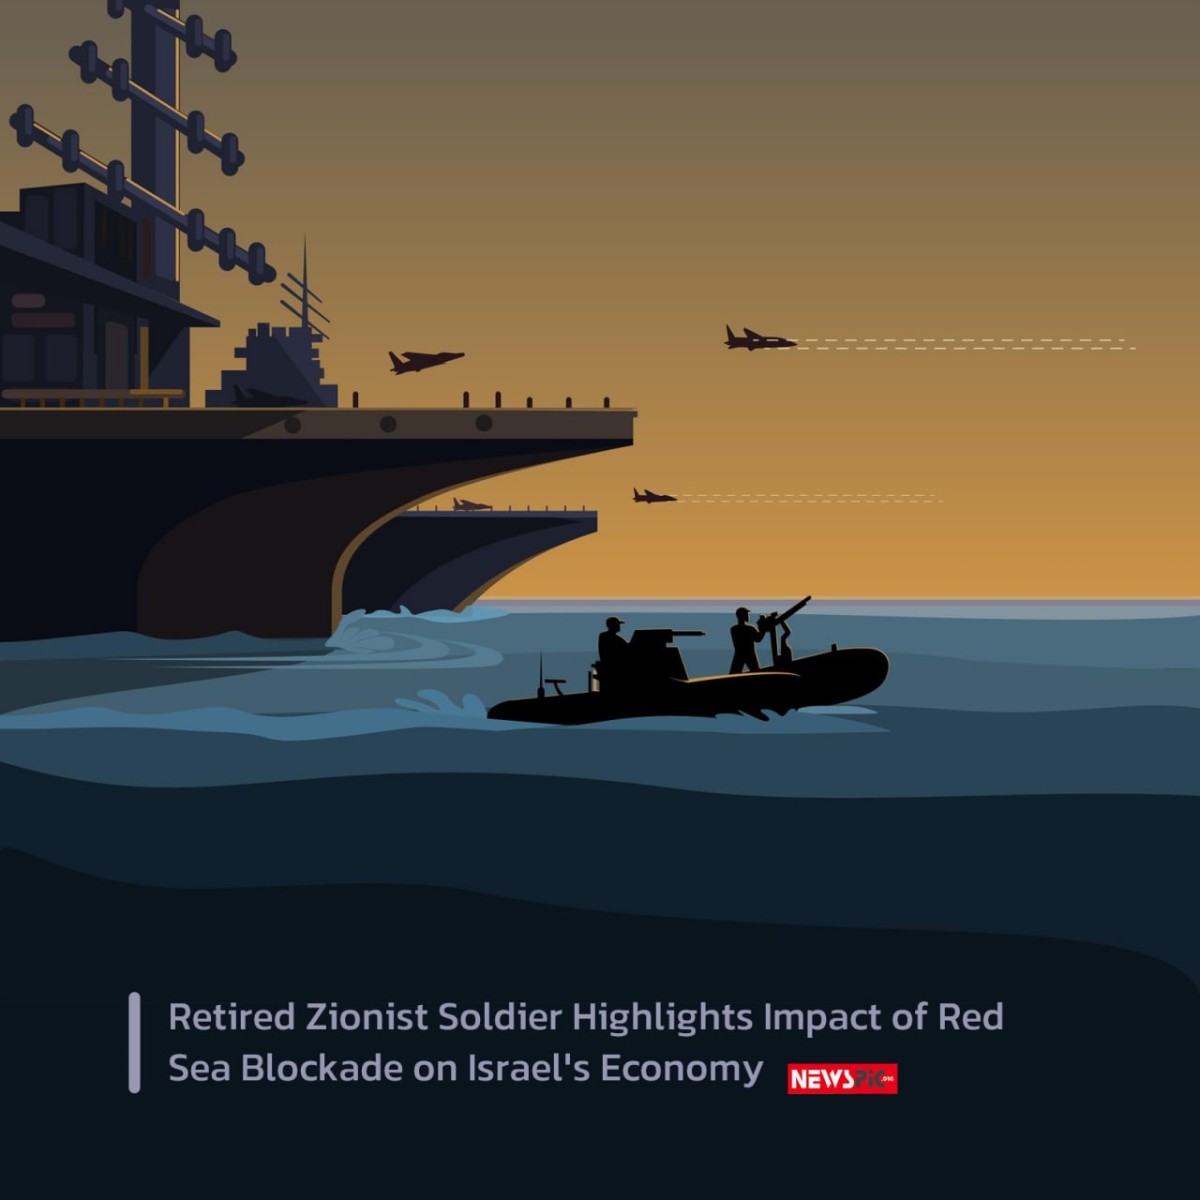 Retired Zionist Soldier Highlights Impact of Red Sea Blockade on Israel's Economy